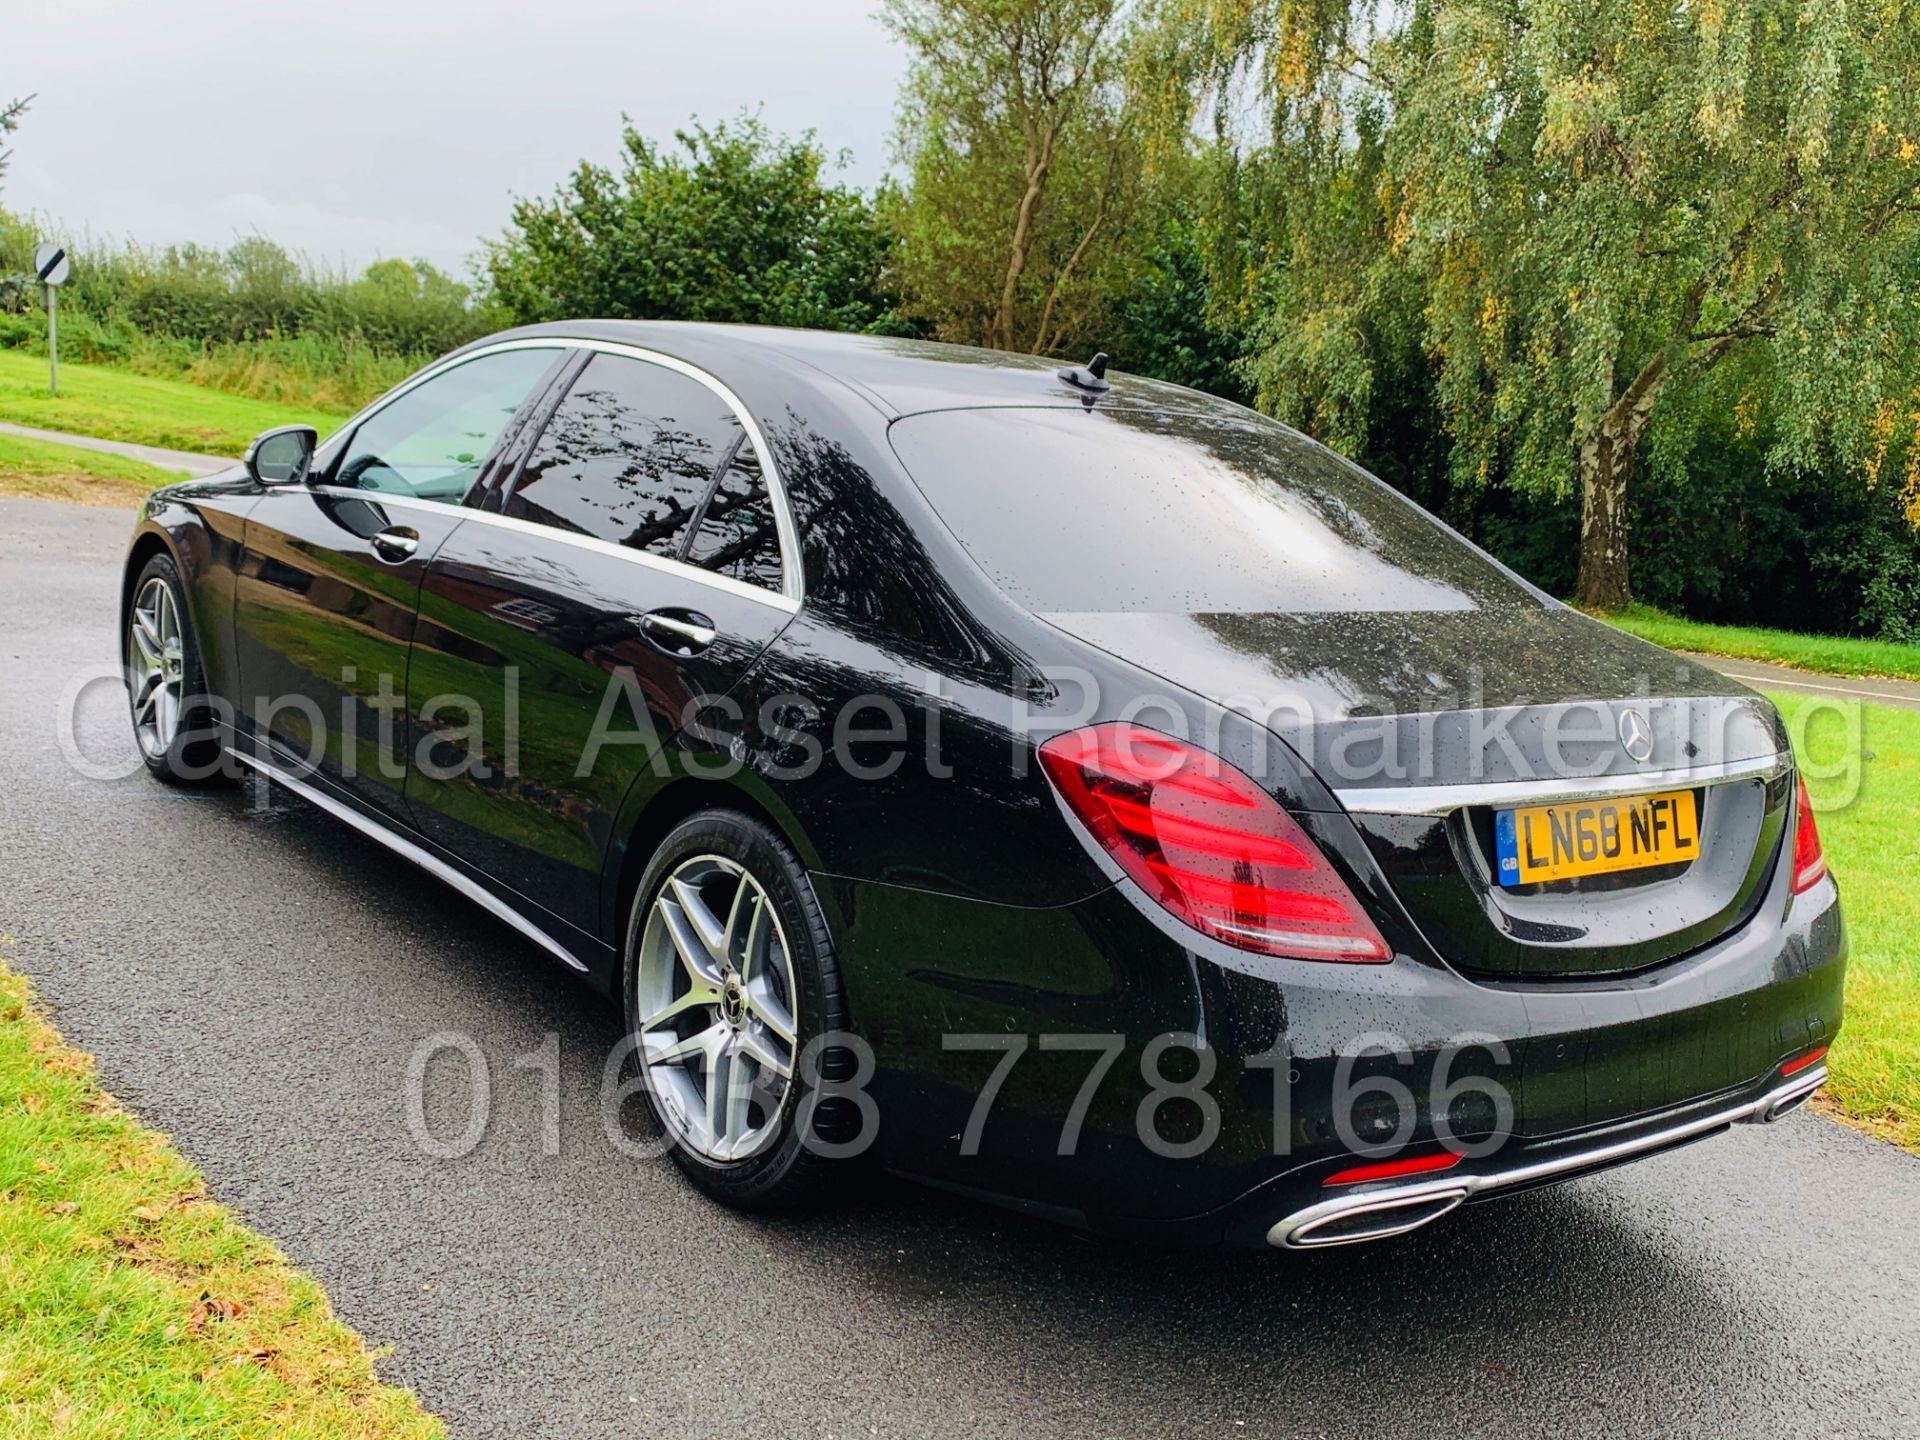 (On Sale) MERCEDES-BENZ S350D LWB *AMG LINE-EXECUTIVE SALOON* (68 REG) 9-G TRONIC *TOP OF THE RANGE* - Image 10 of 63